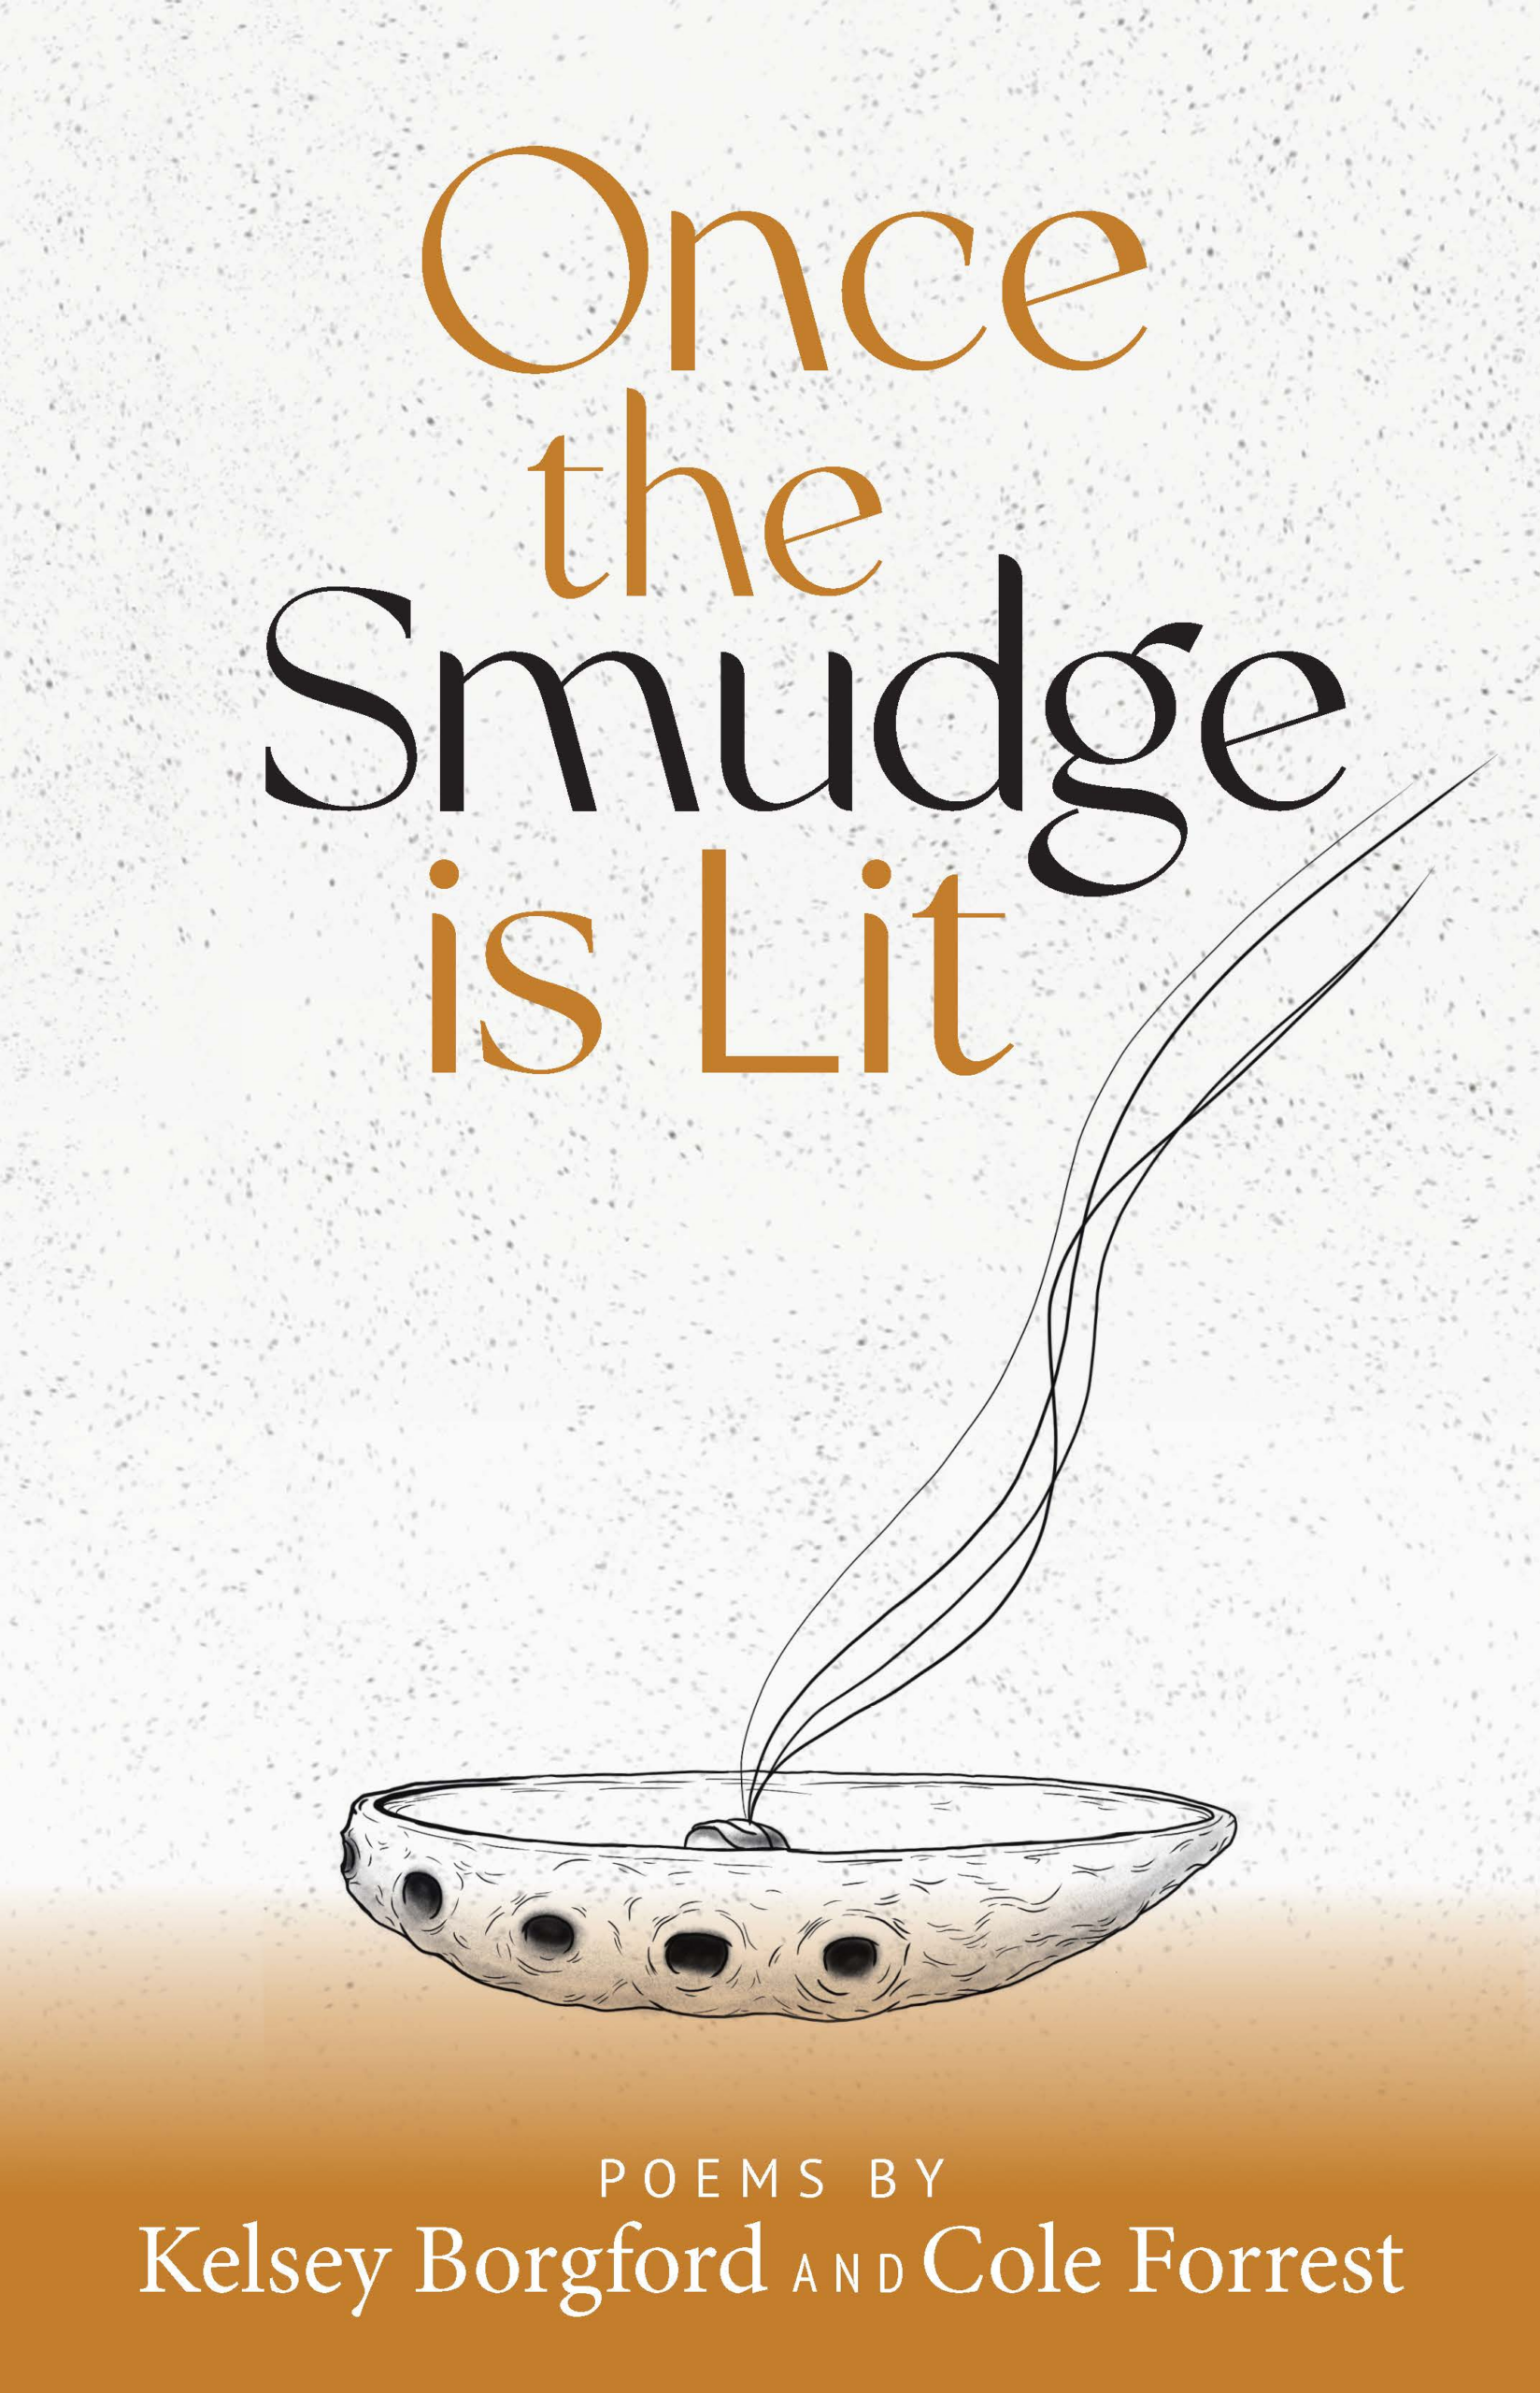 The cover of Once the Smudge is Lit by Kelsey Borgford and Cole Forrest